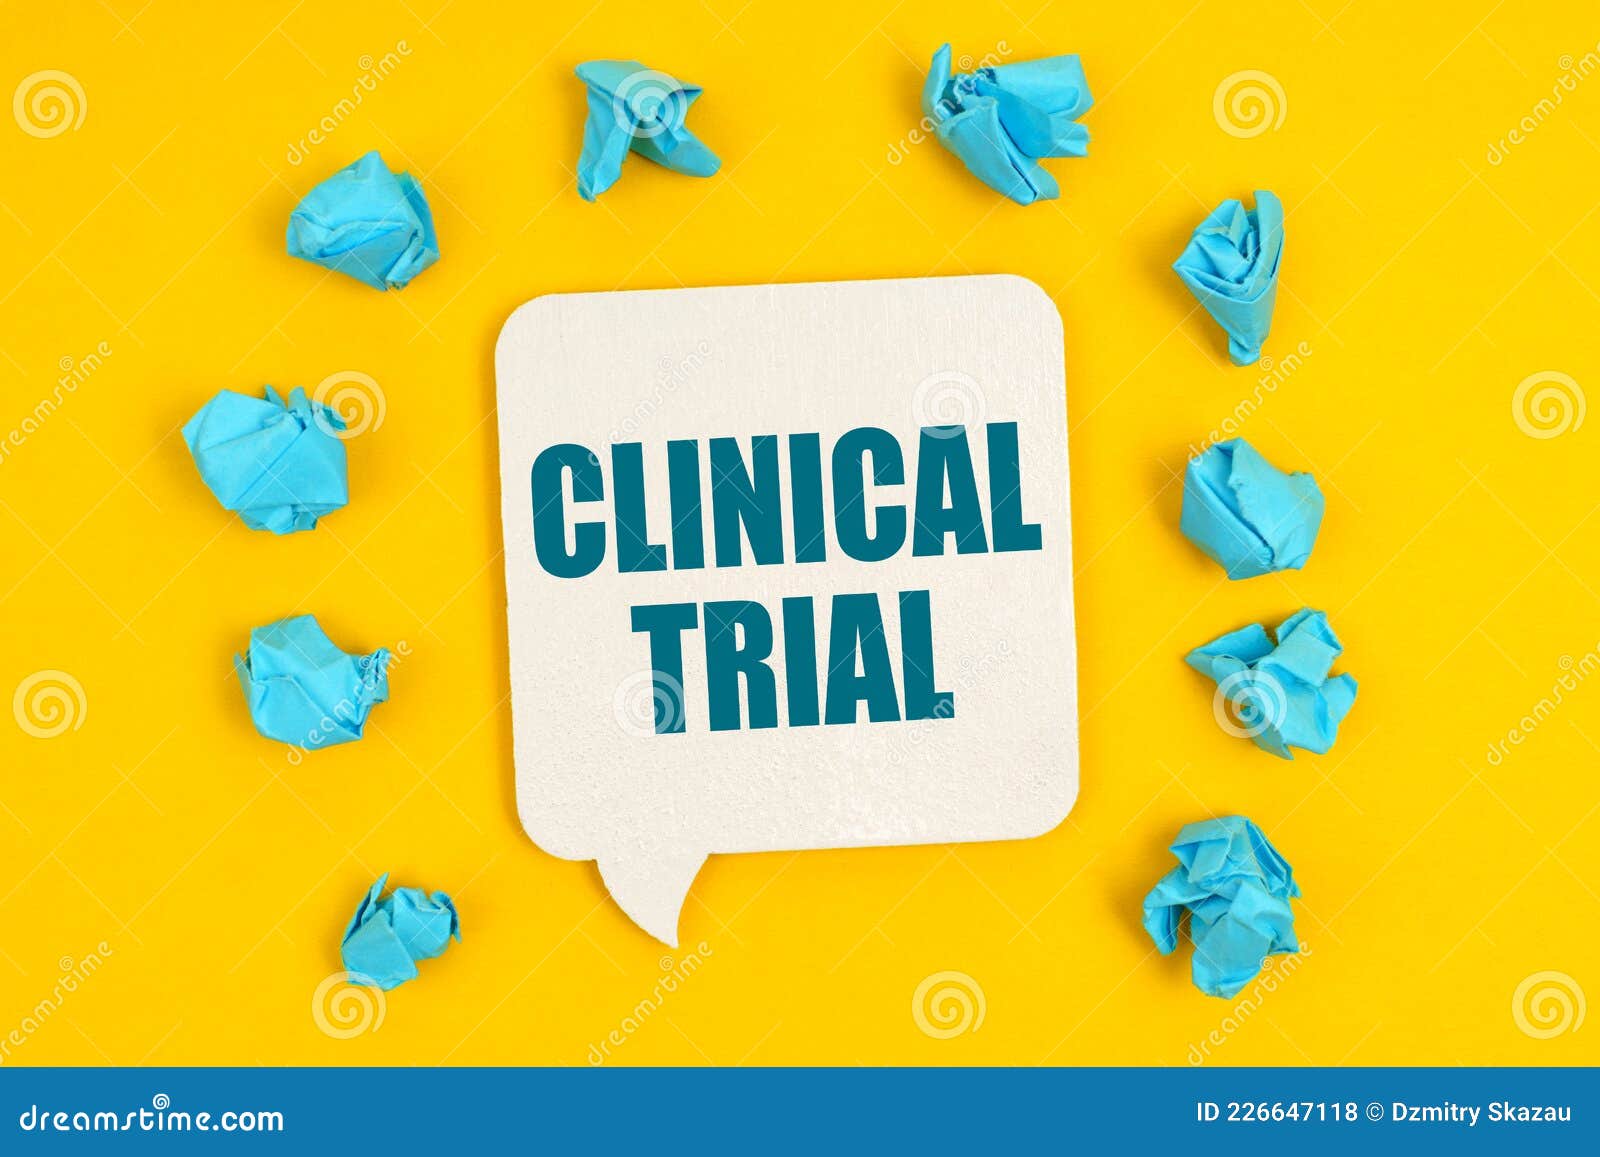 on a yellow background, blue pieces of paper and a sign with the inscription - clinical trial